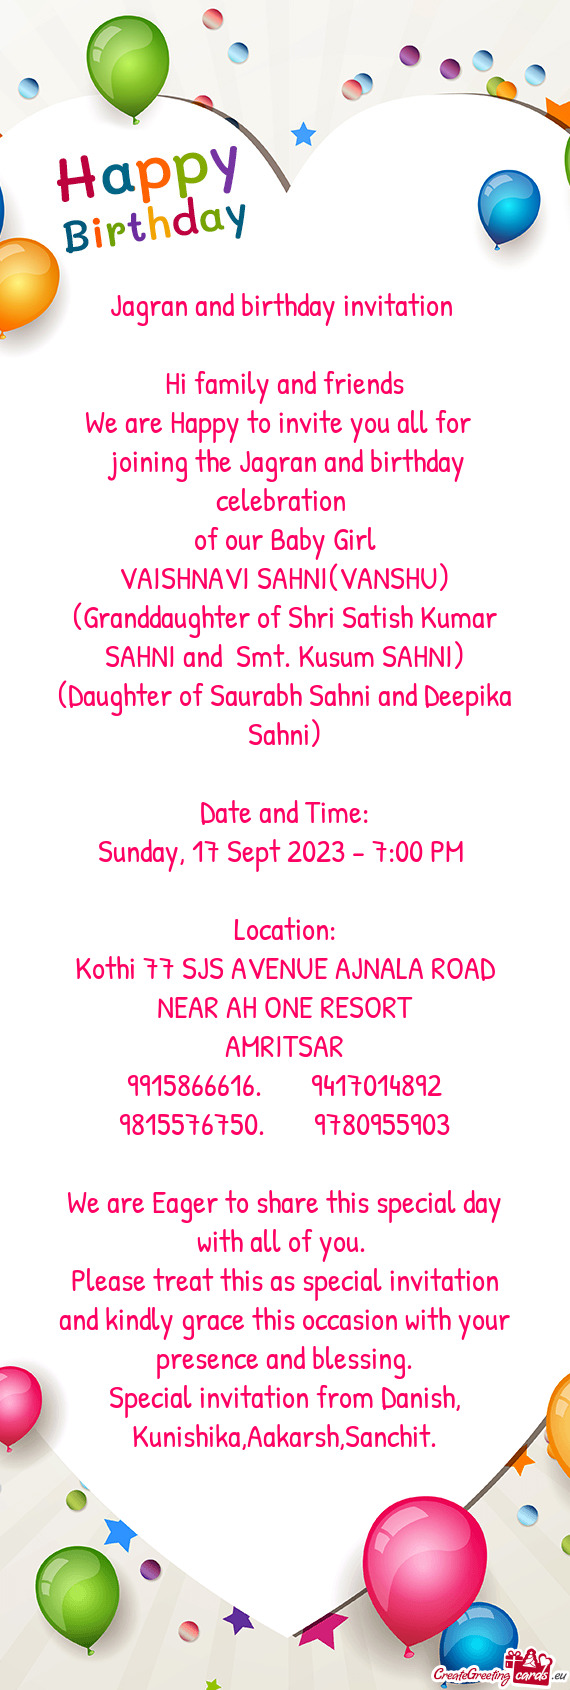 Please treat this as special invitation and kindly grace this occasion with your presence and blessi